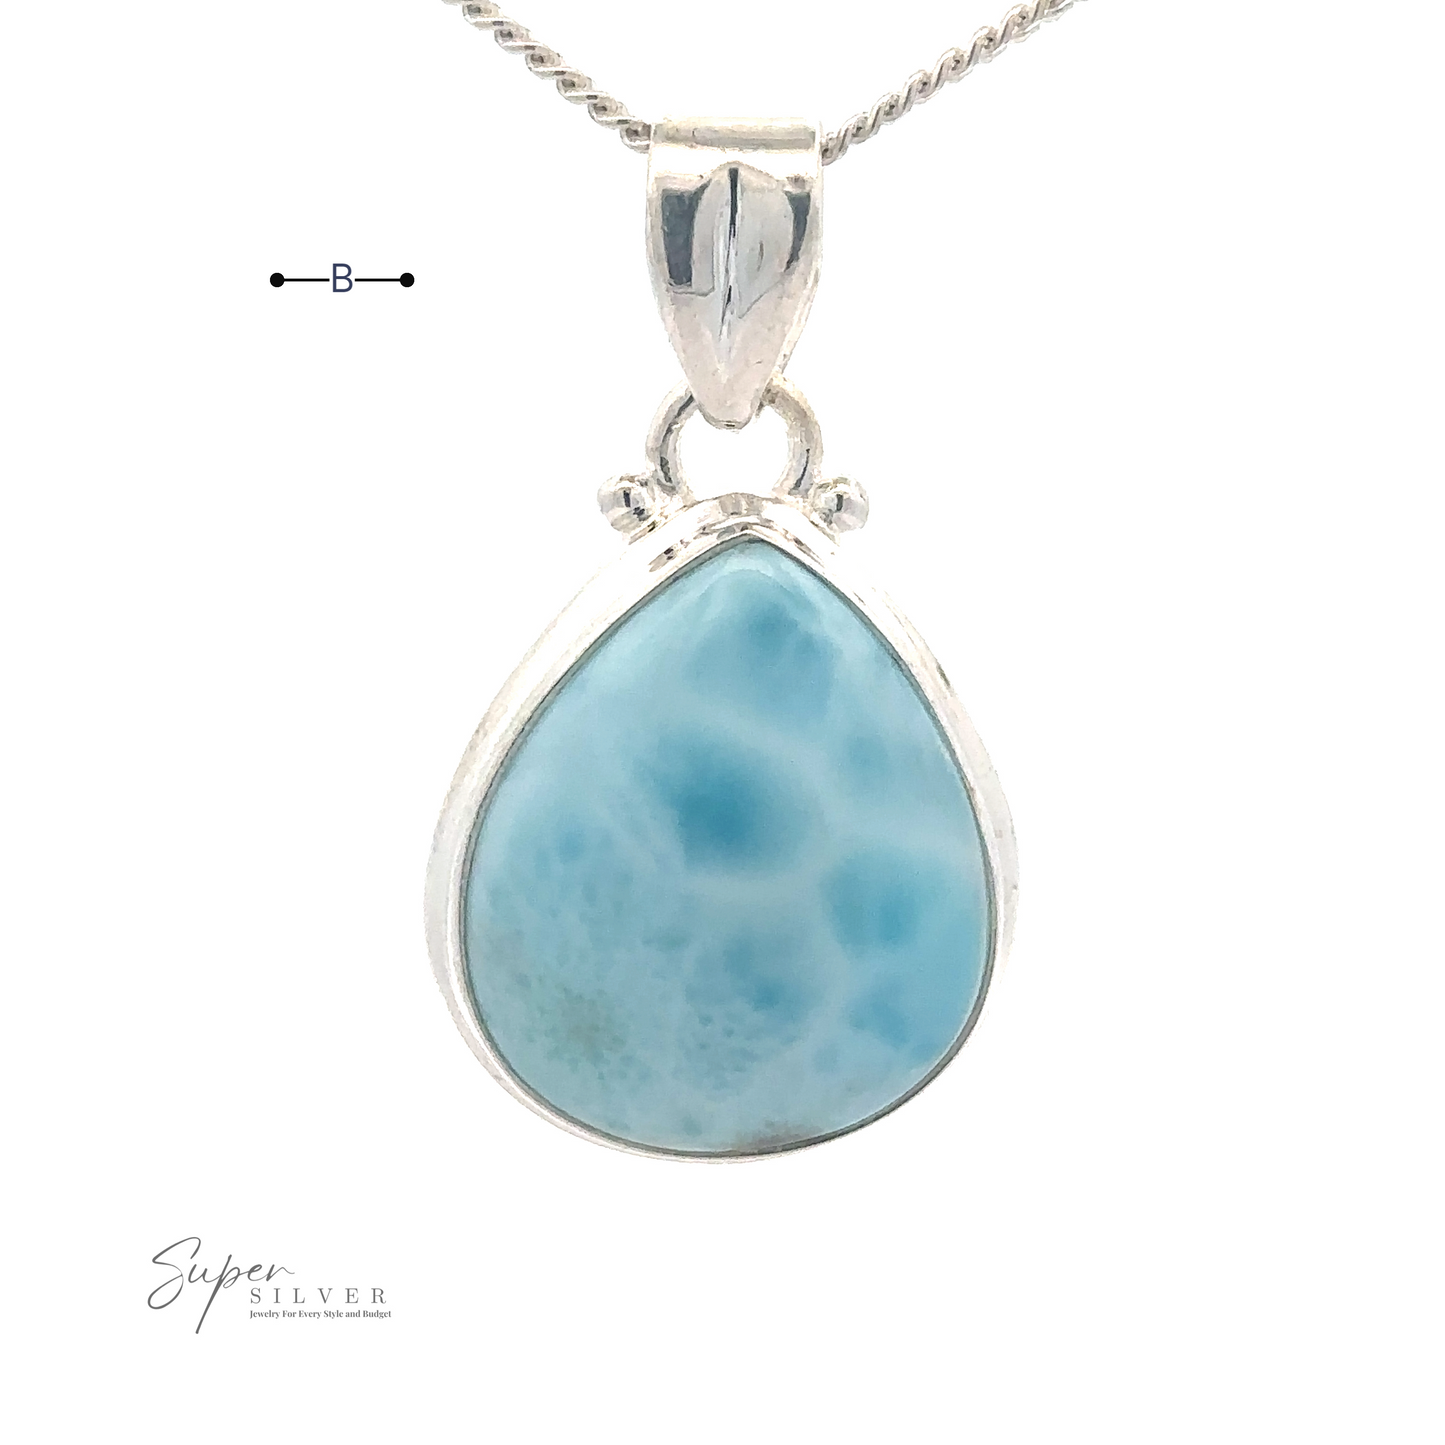 
                  
                    Small Teardrop Larimar Pendant. The stone has a marbled light and dark blue pattern, perfect for a night out. A size reference marked "B" is visible near the pendant. Branding reads "Super Silver.
                  
                